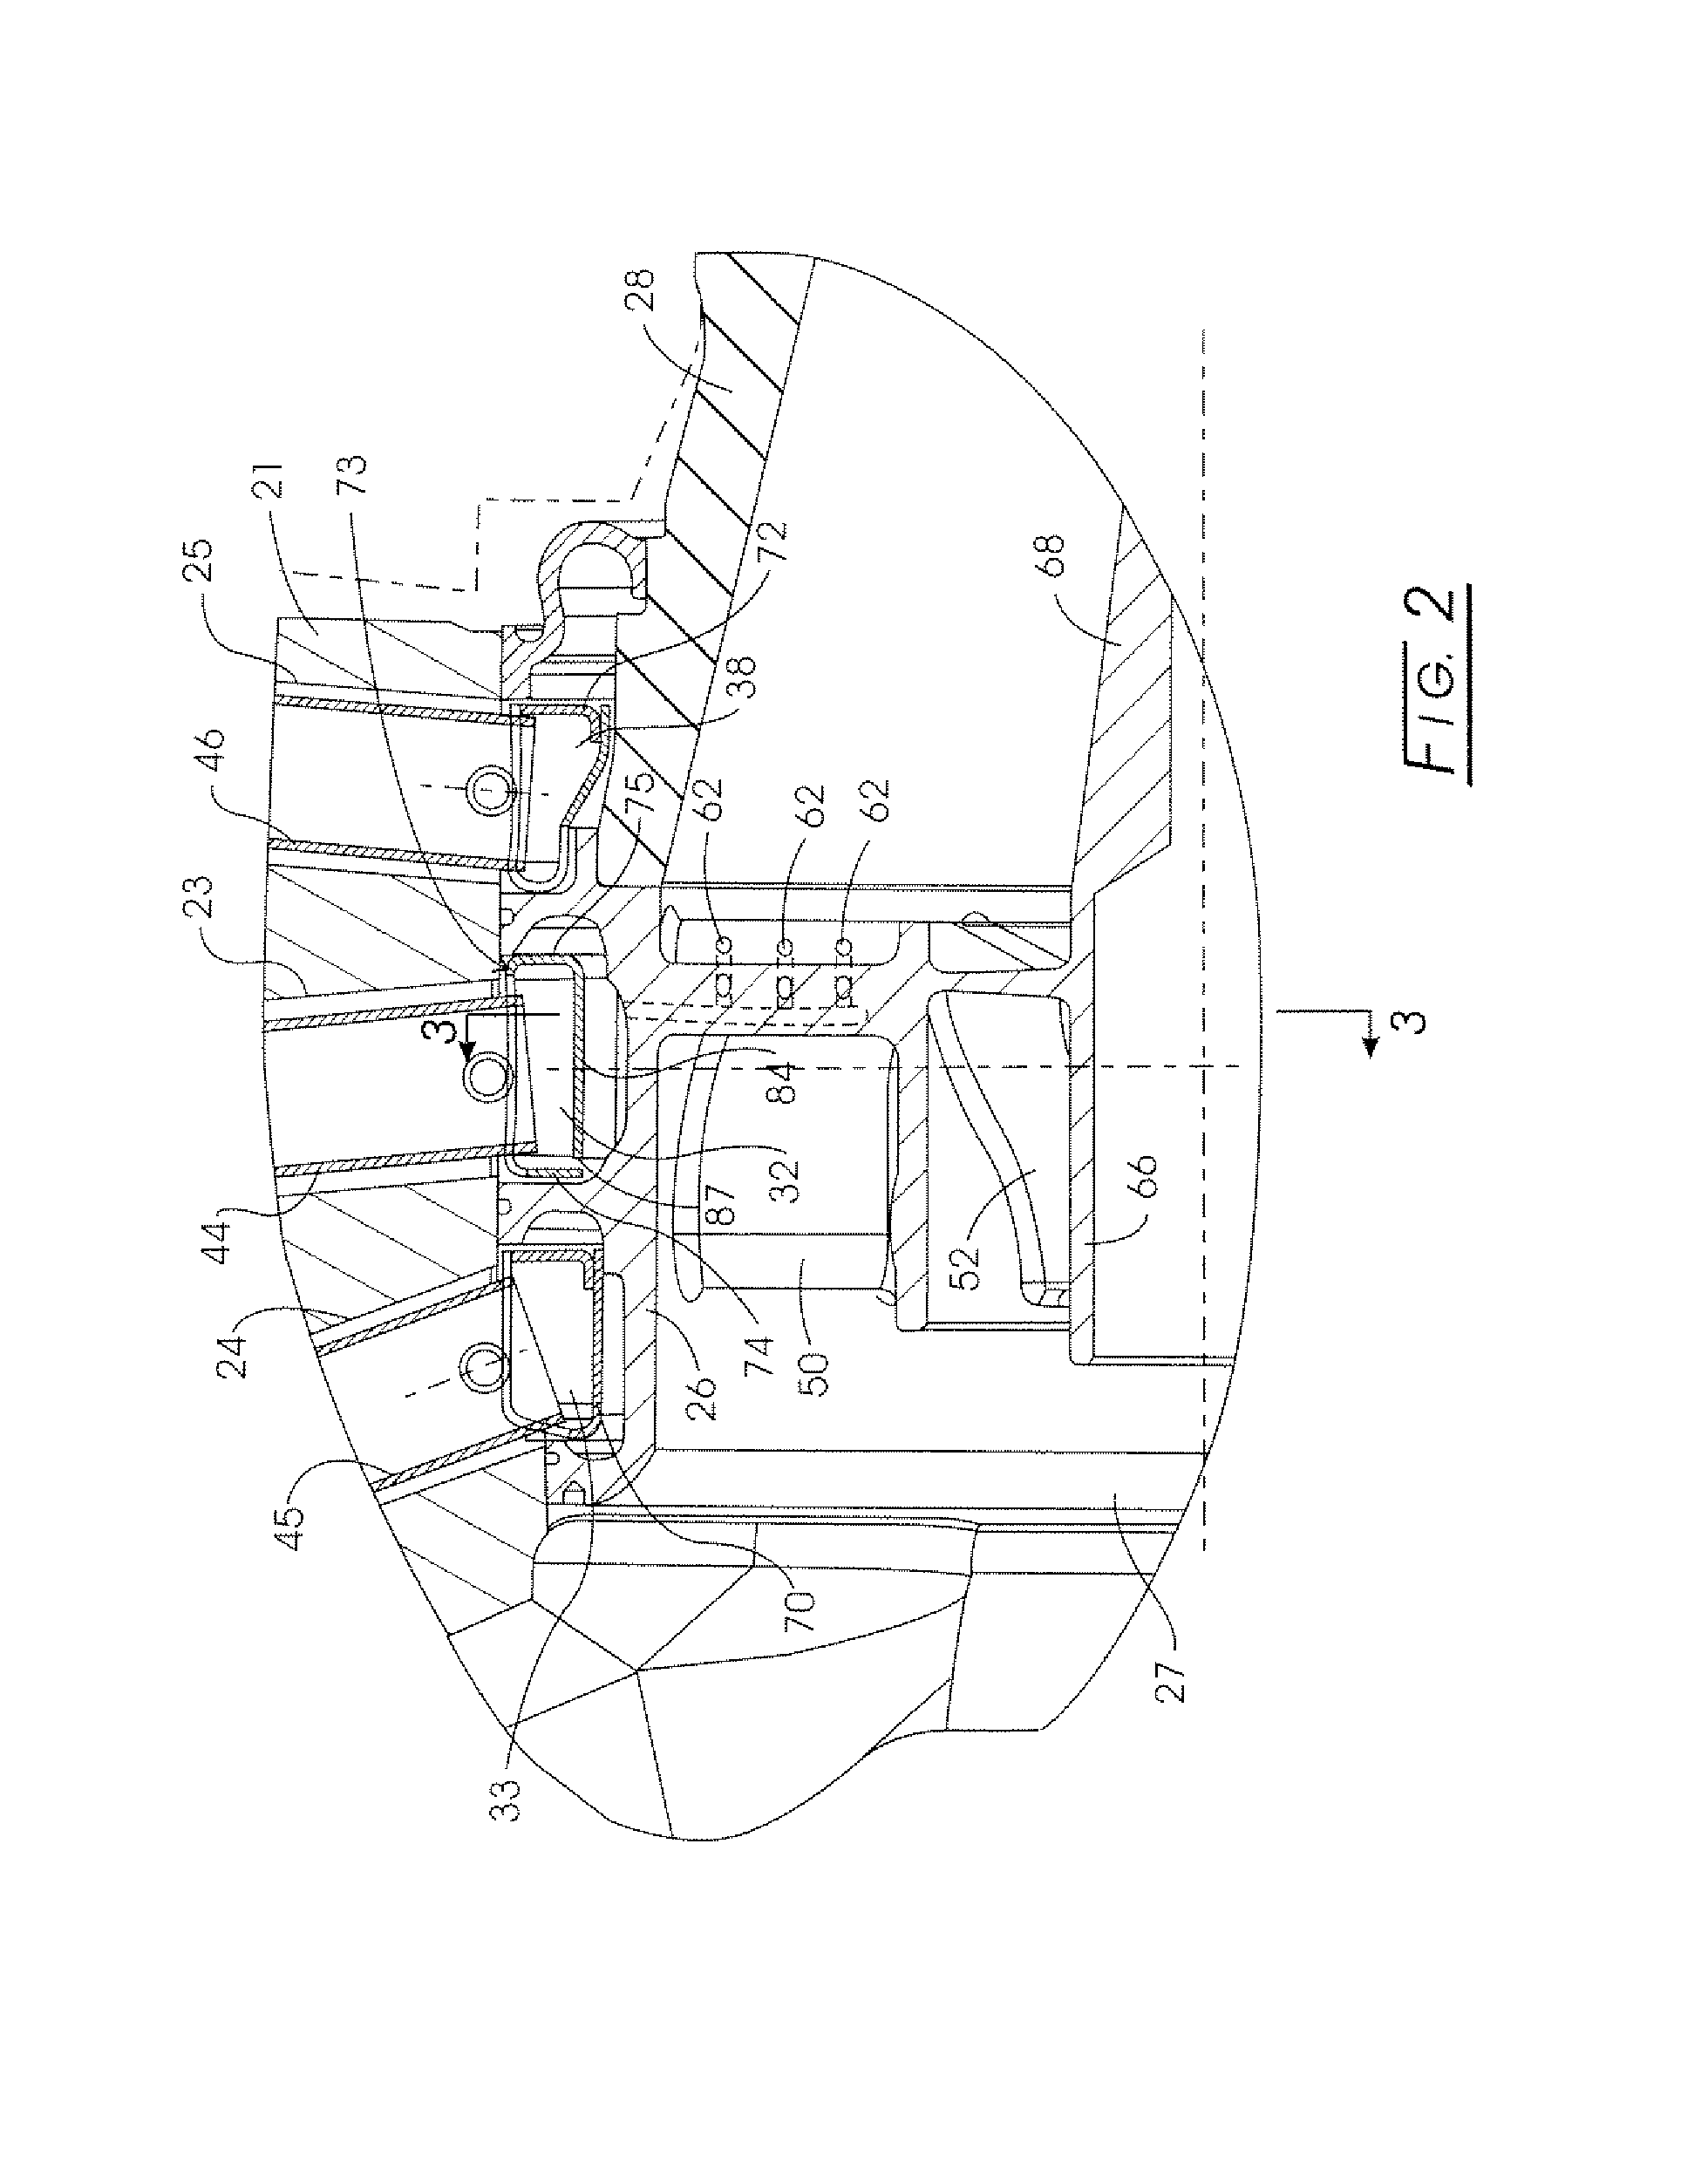 Nozzle assembly with fuel tube deflector